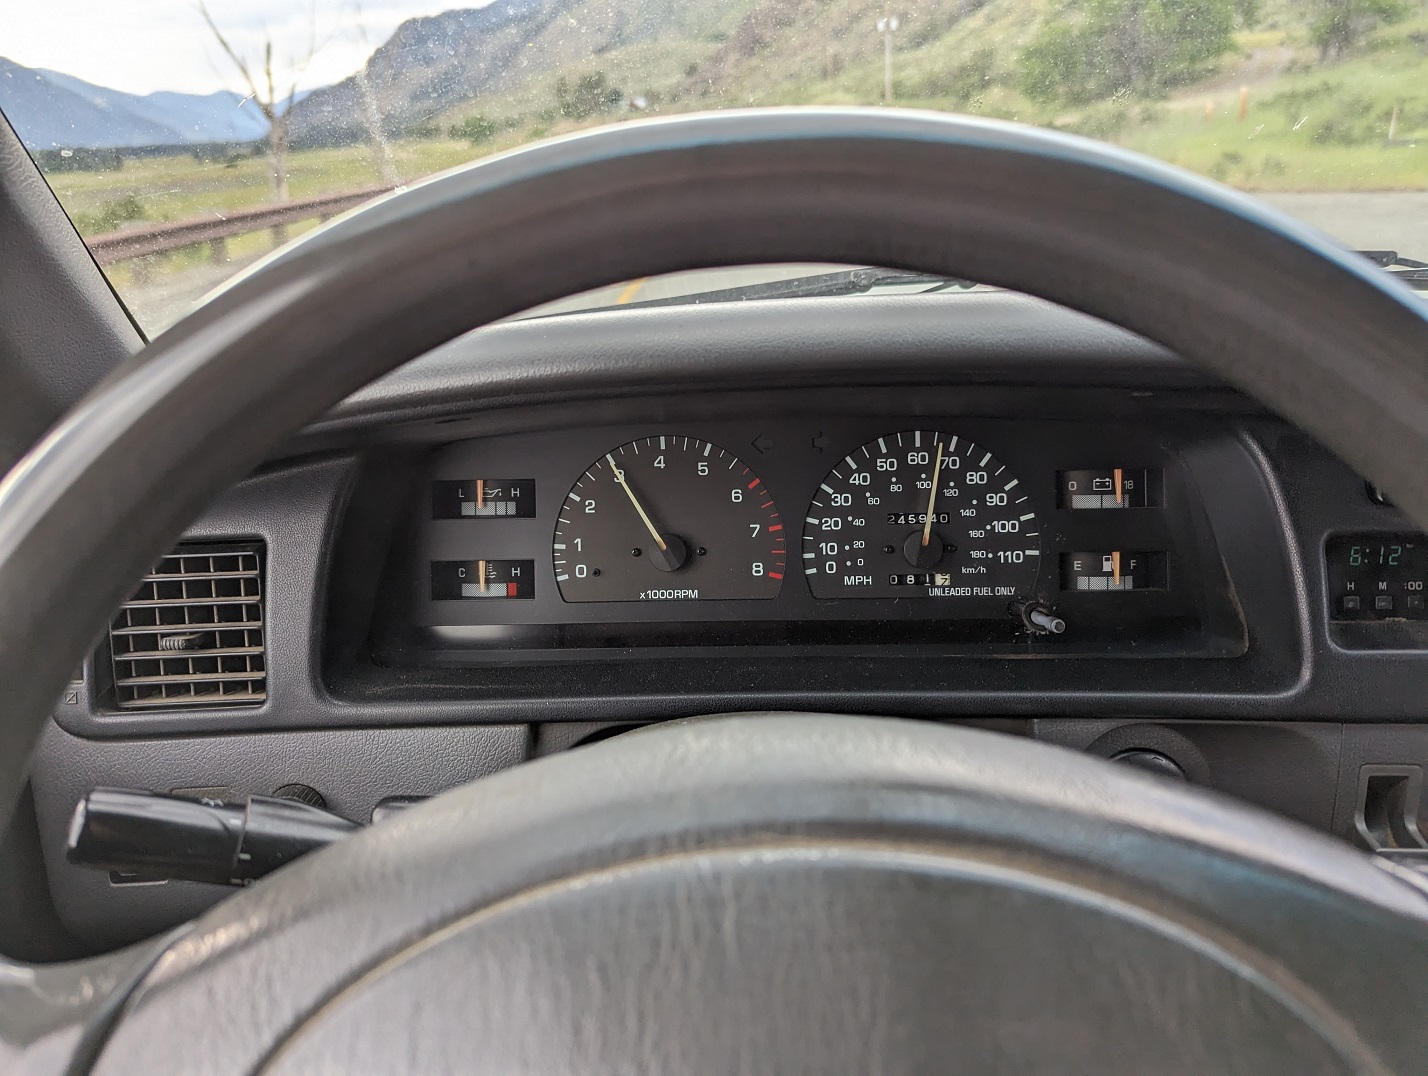 instrument panel while driving in 5th gear